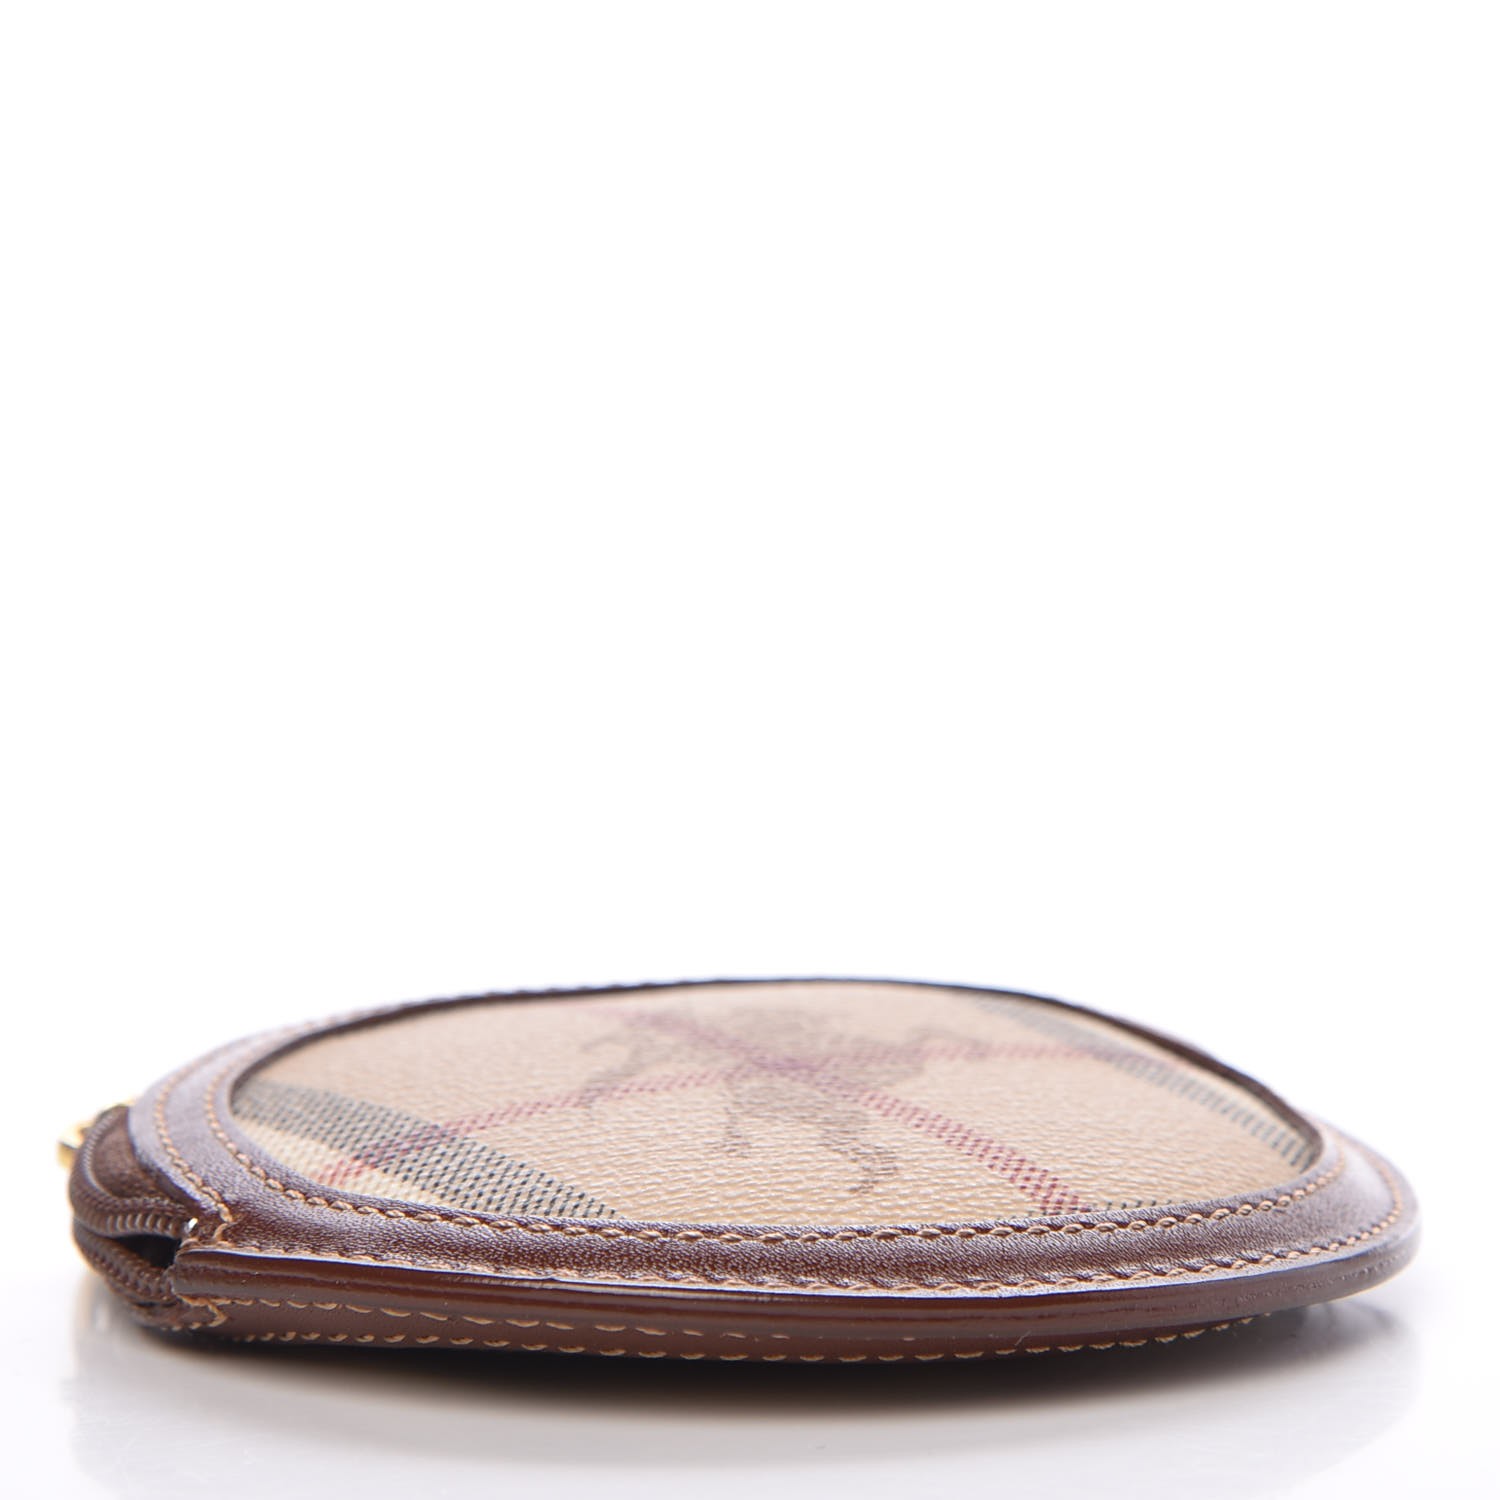 burberry round coin purse